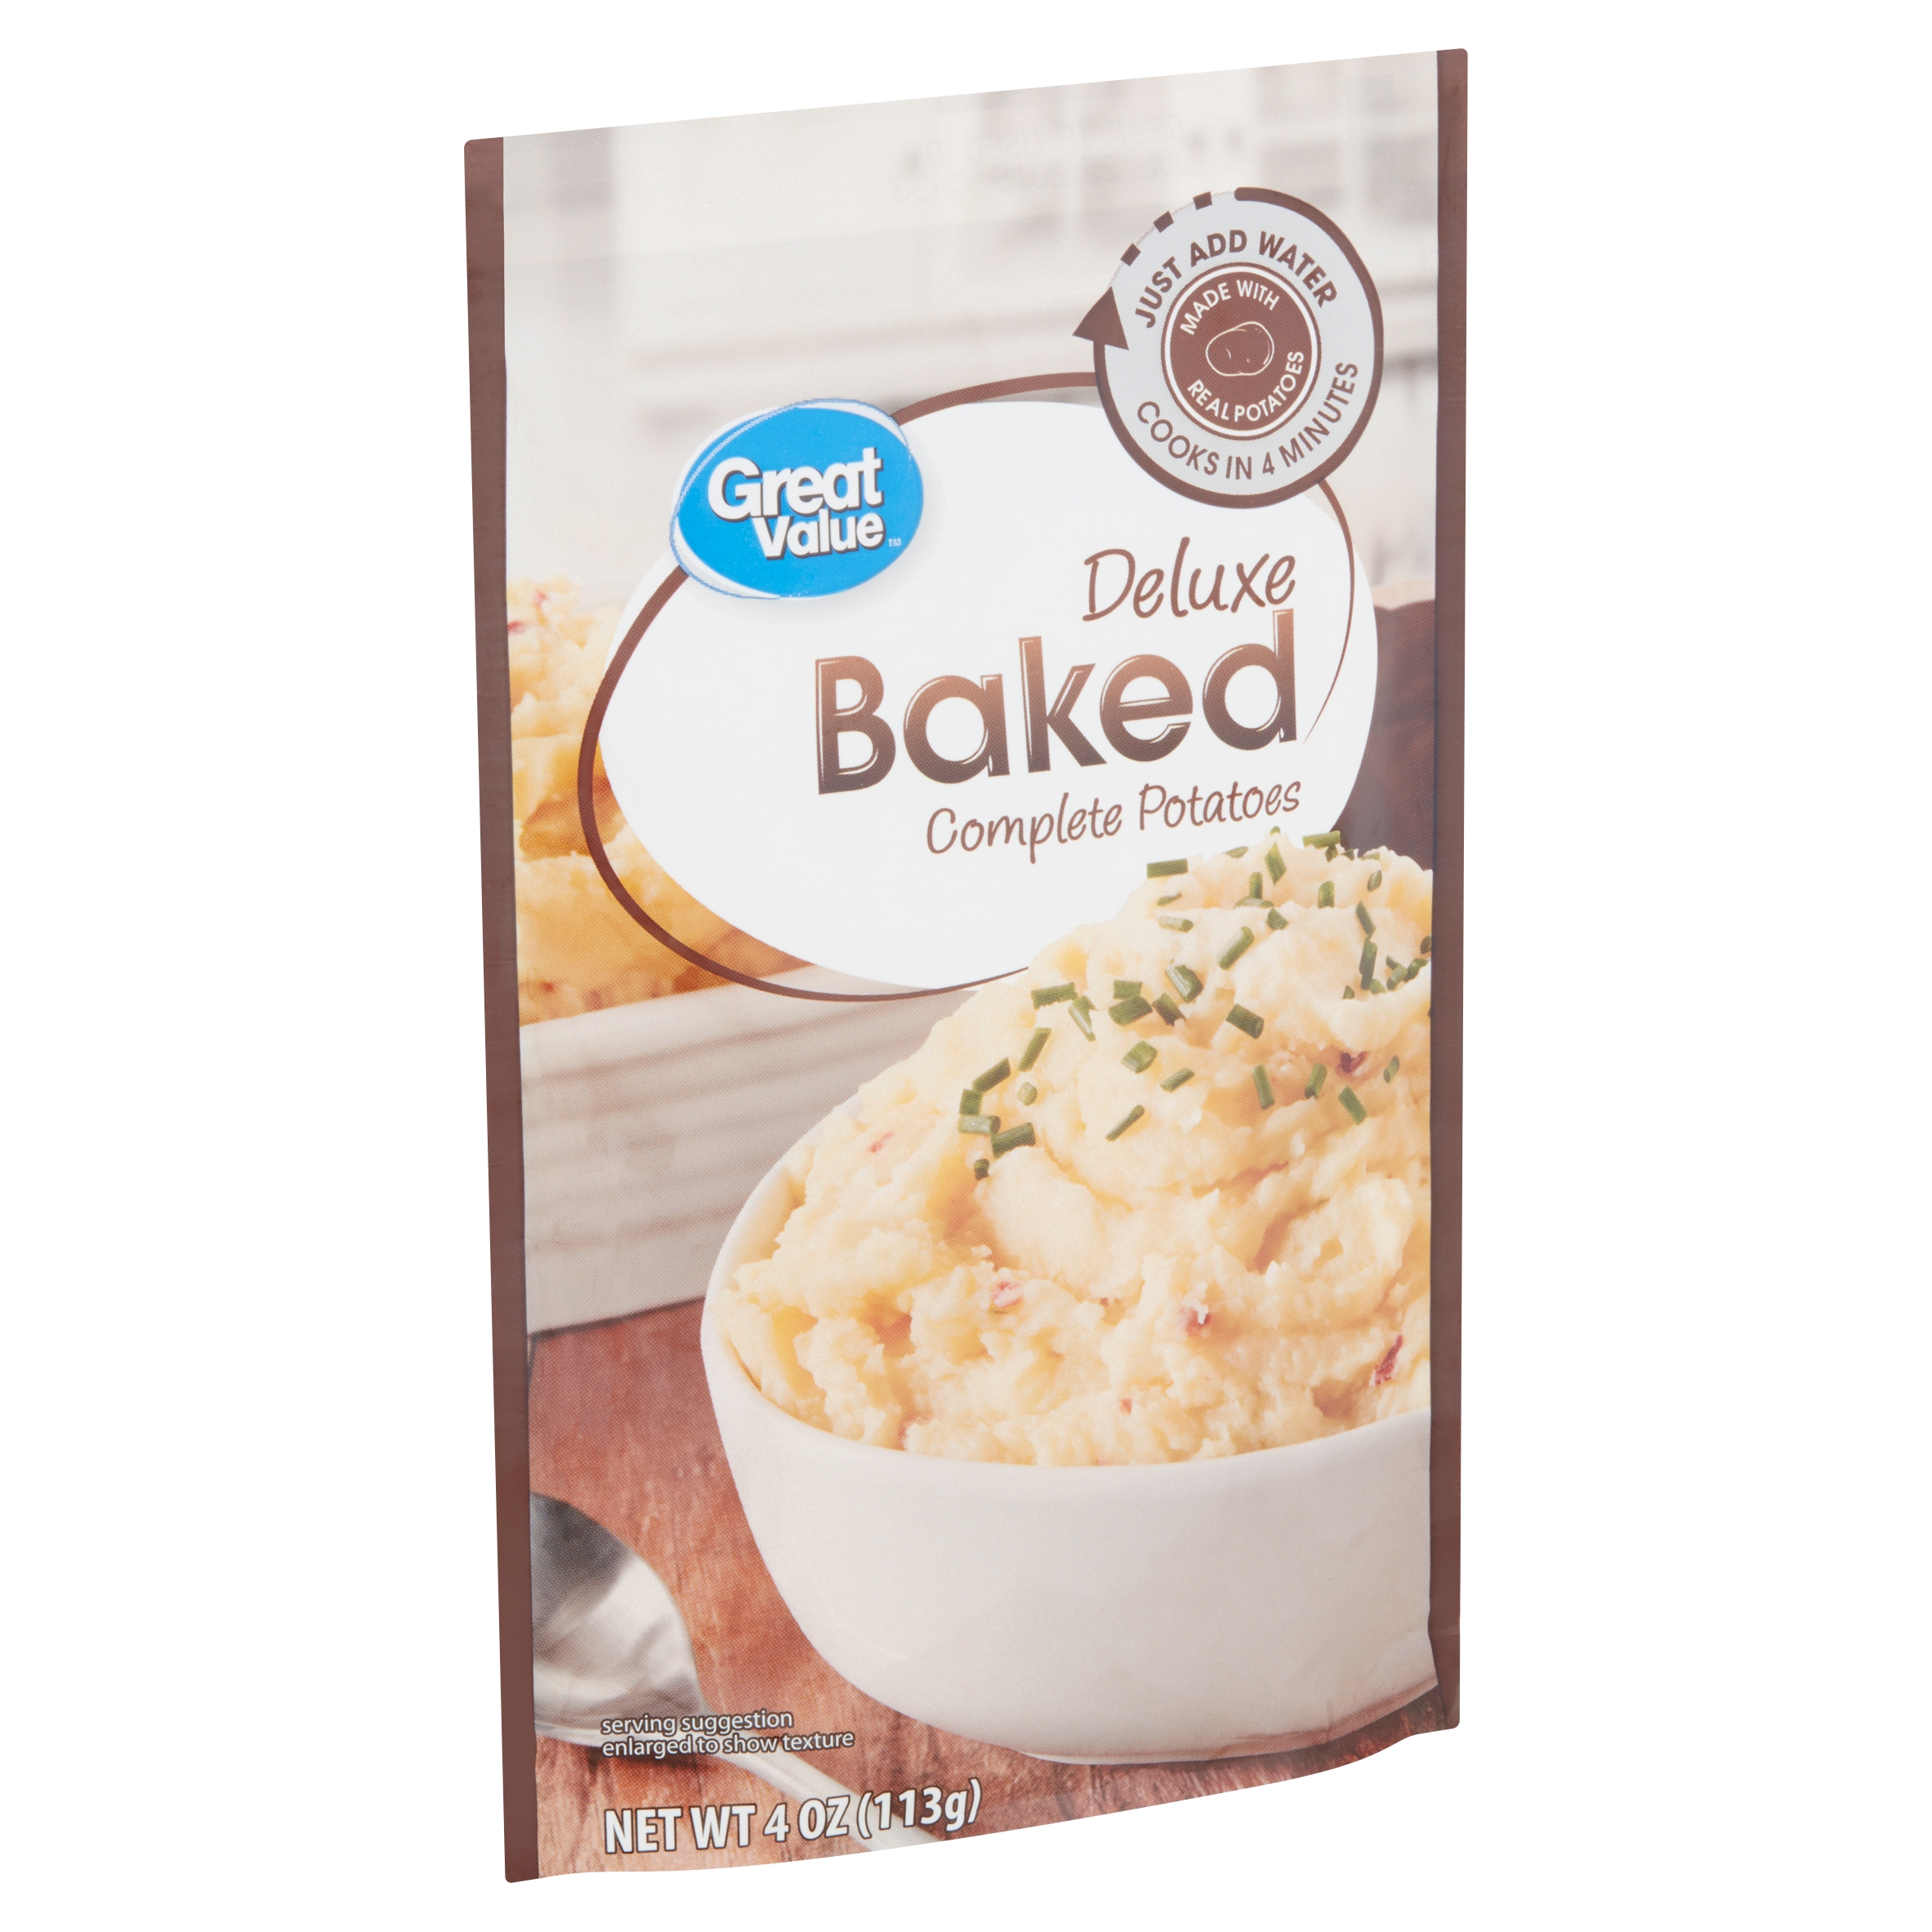 Great Value Deluxe Baked Complete Potatoes, 4 Oz Image